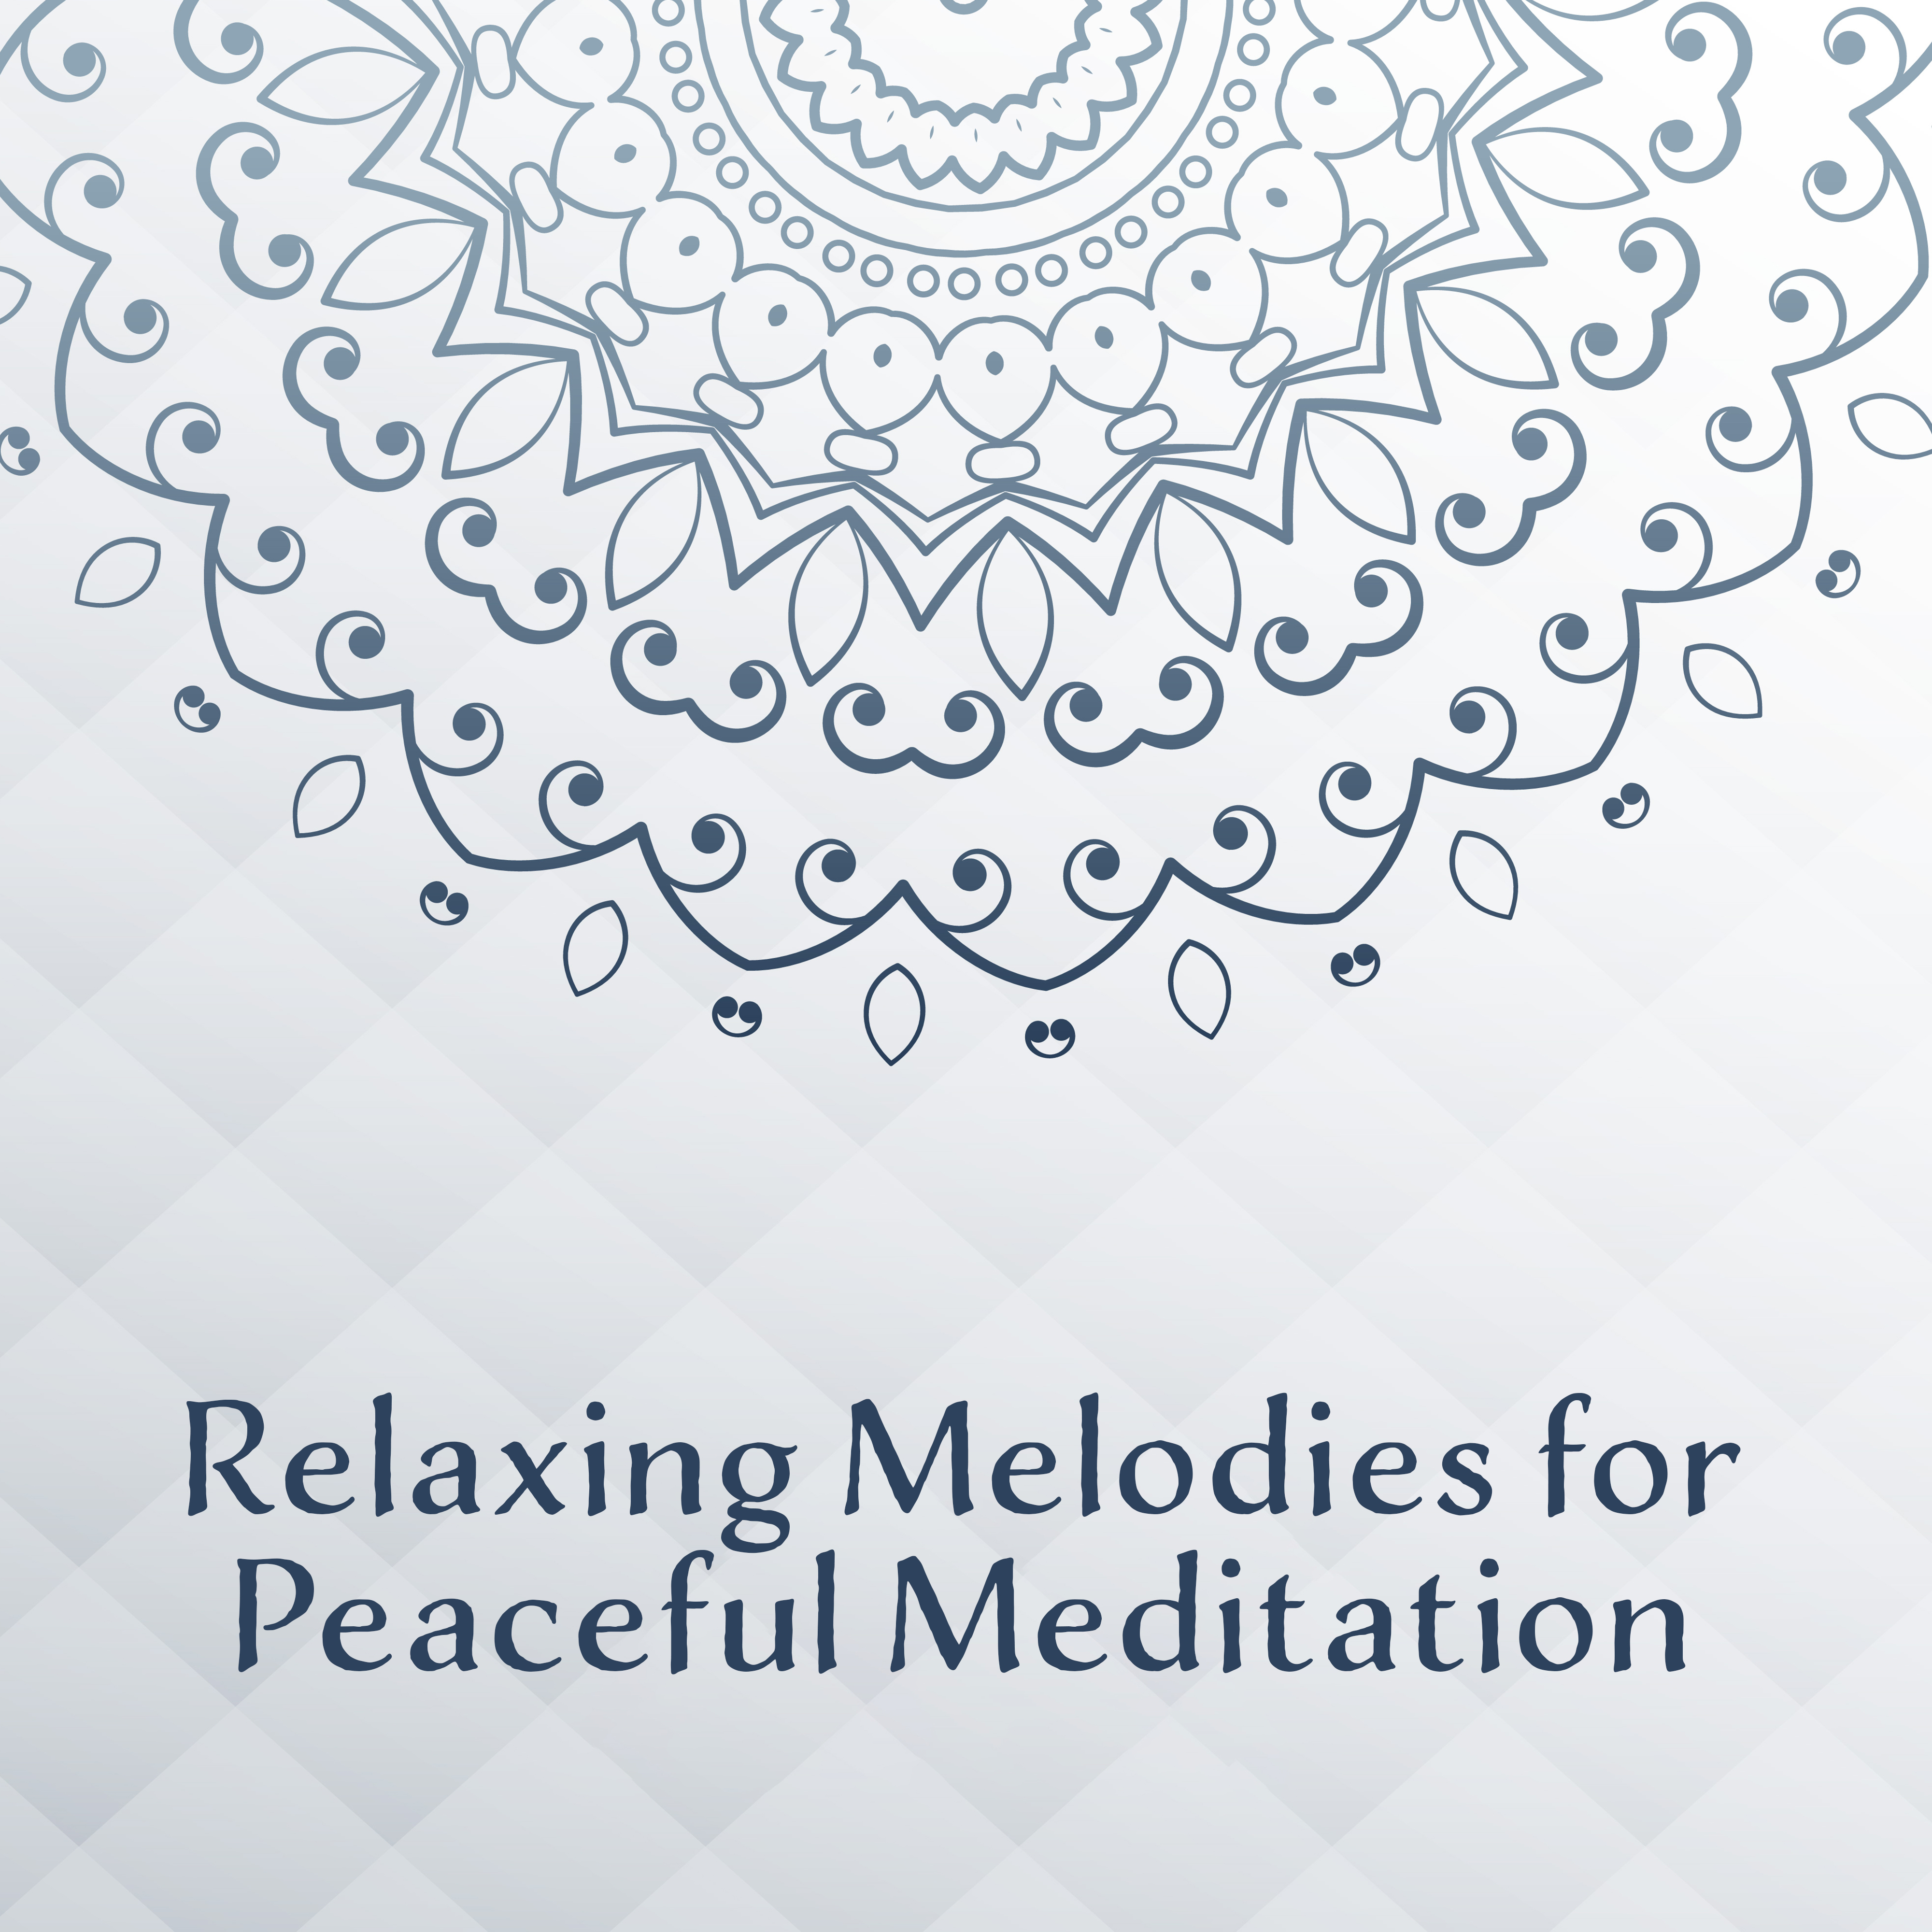 Relaxing Melodies for Peaceful Meditation